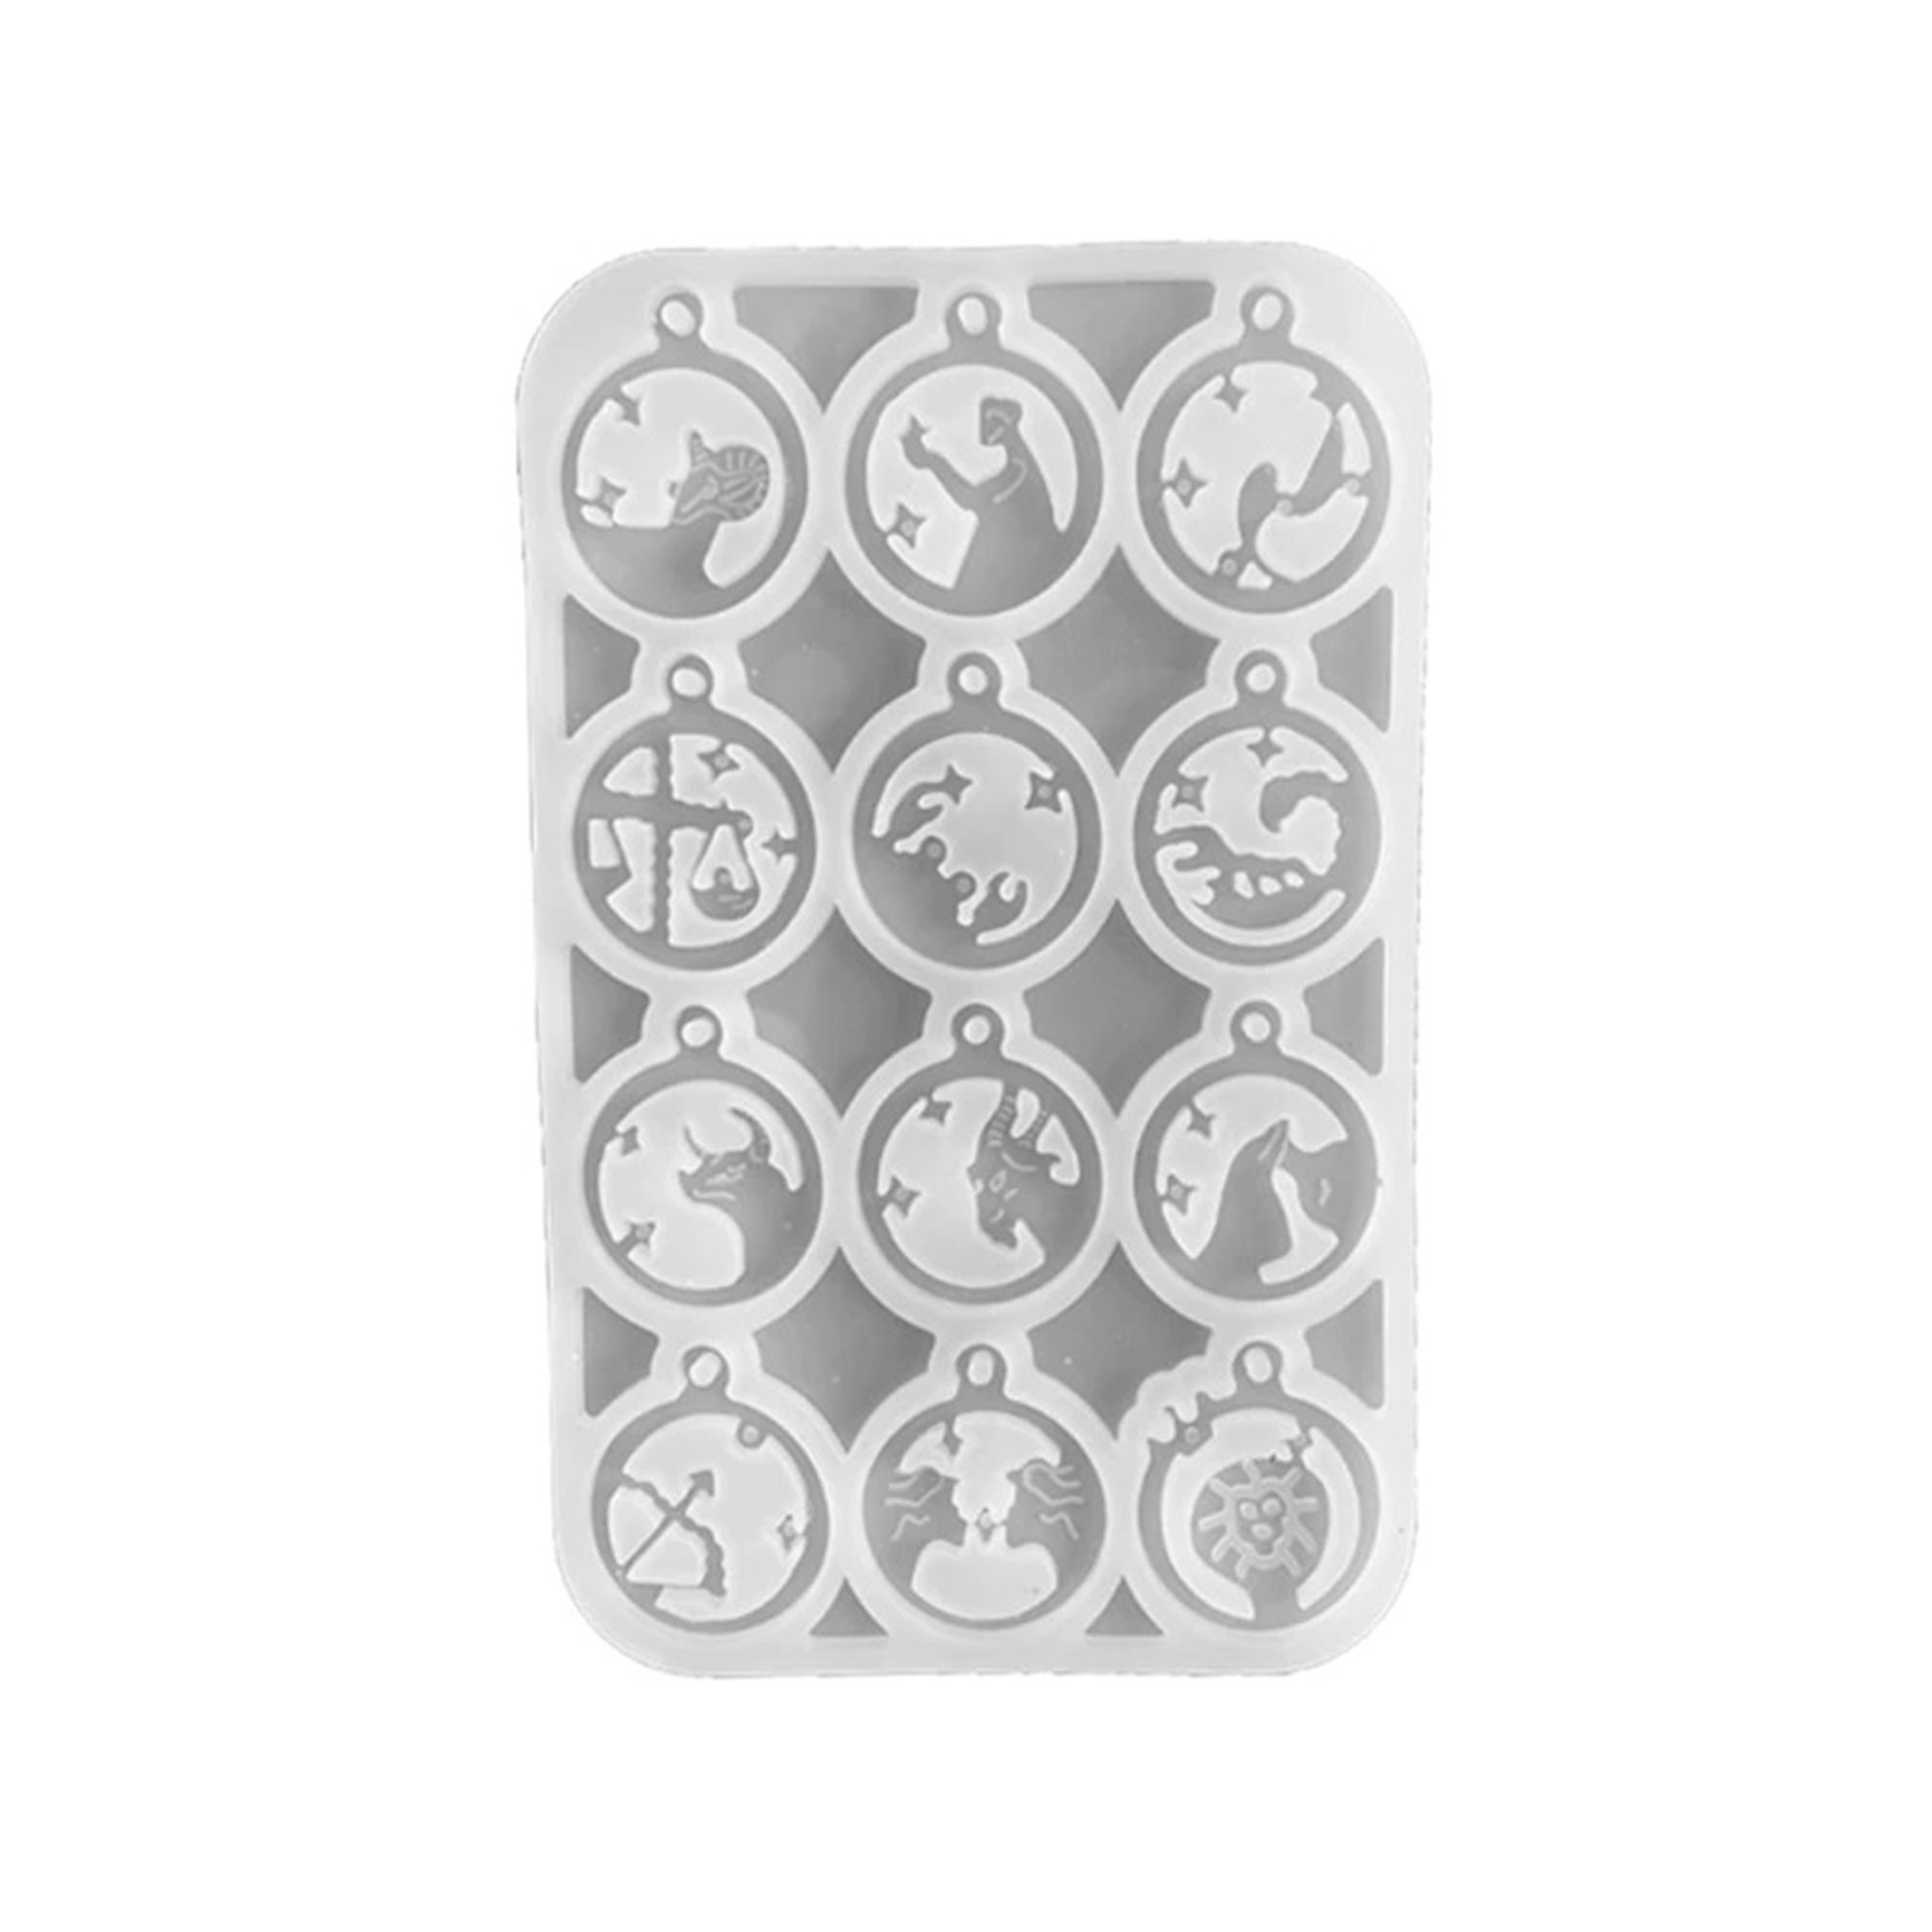 Dominos Silicone Mold, Dominoes Resin Mold, Domino Tile Mold Game Mold,  Craft Supplies, Silicone Dominoes Set Mould 